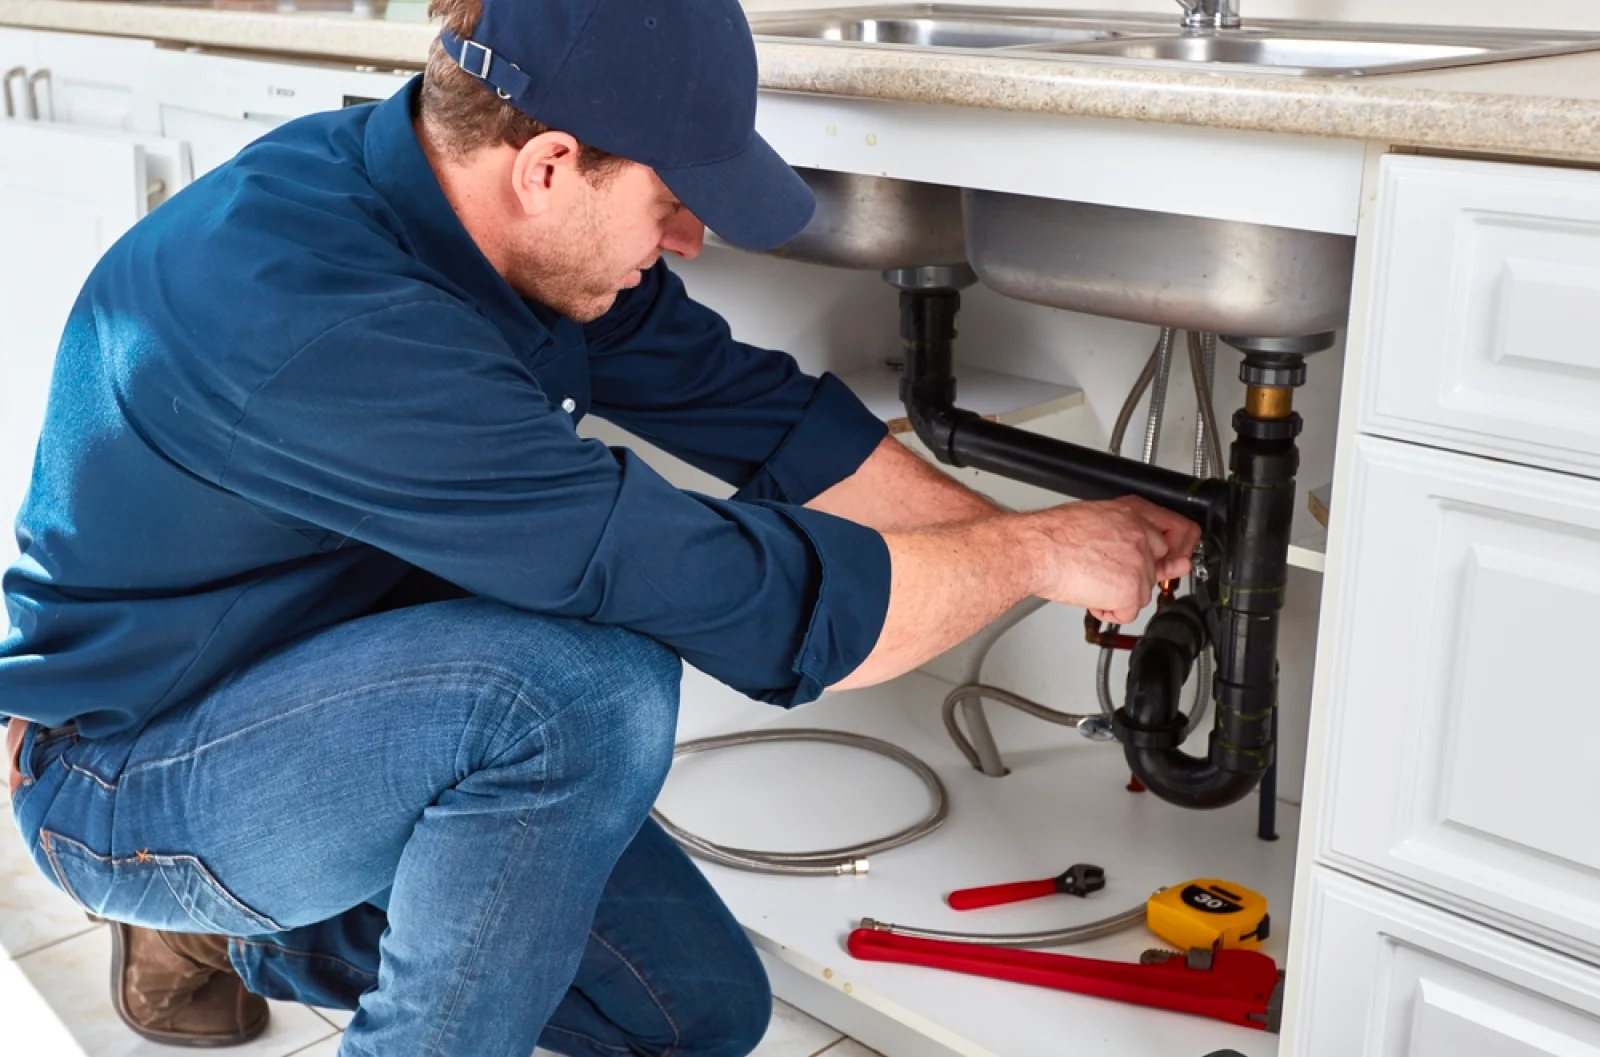 residential plumbing services